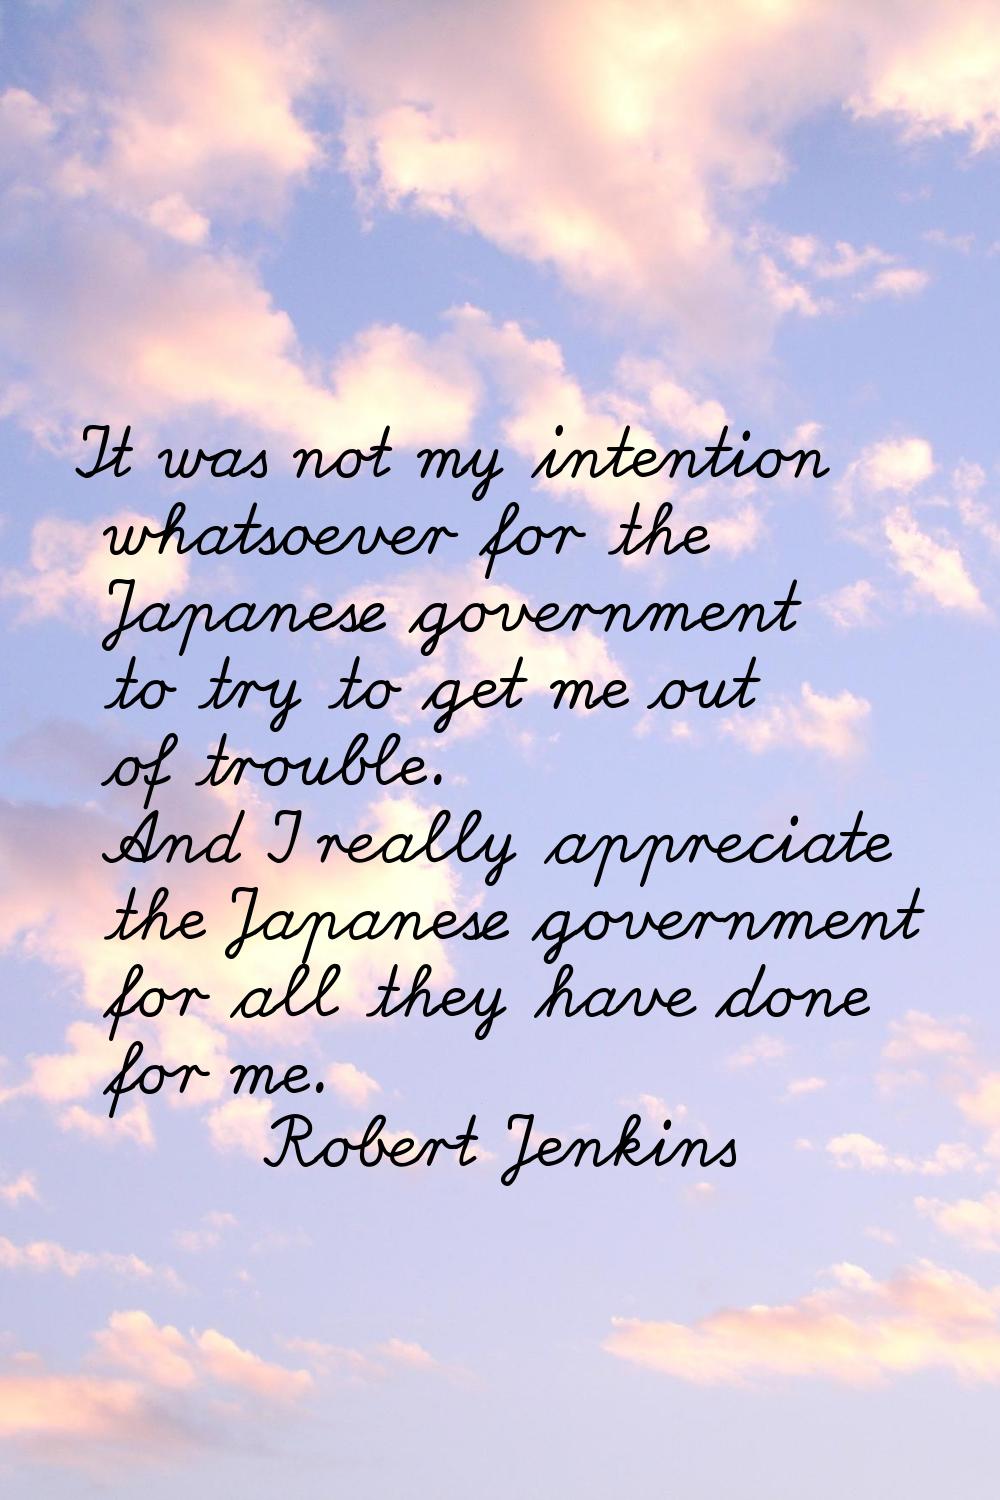 It was not my intention whatsoever for the Japanese government to try to get me out of trouble. And